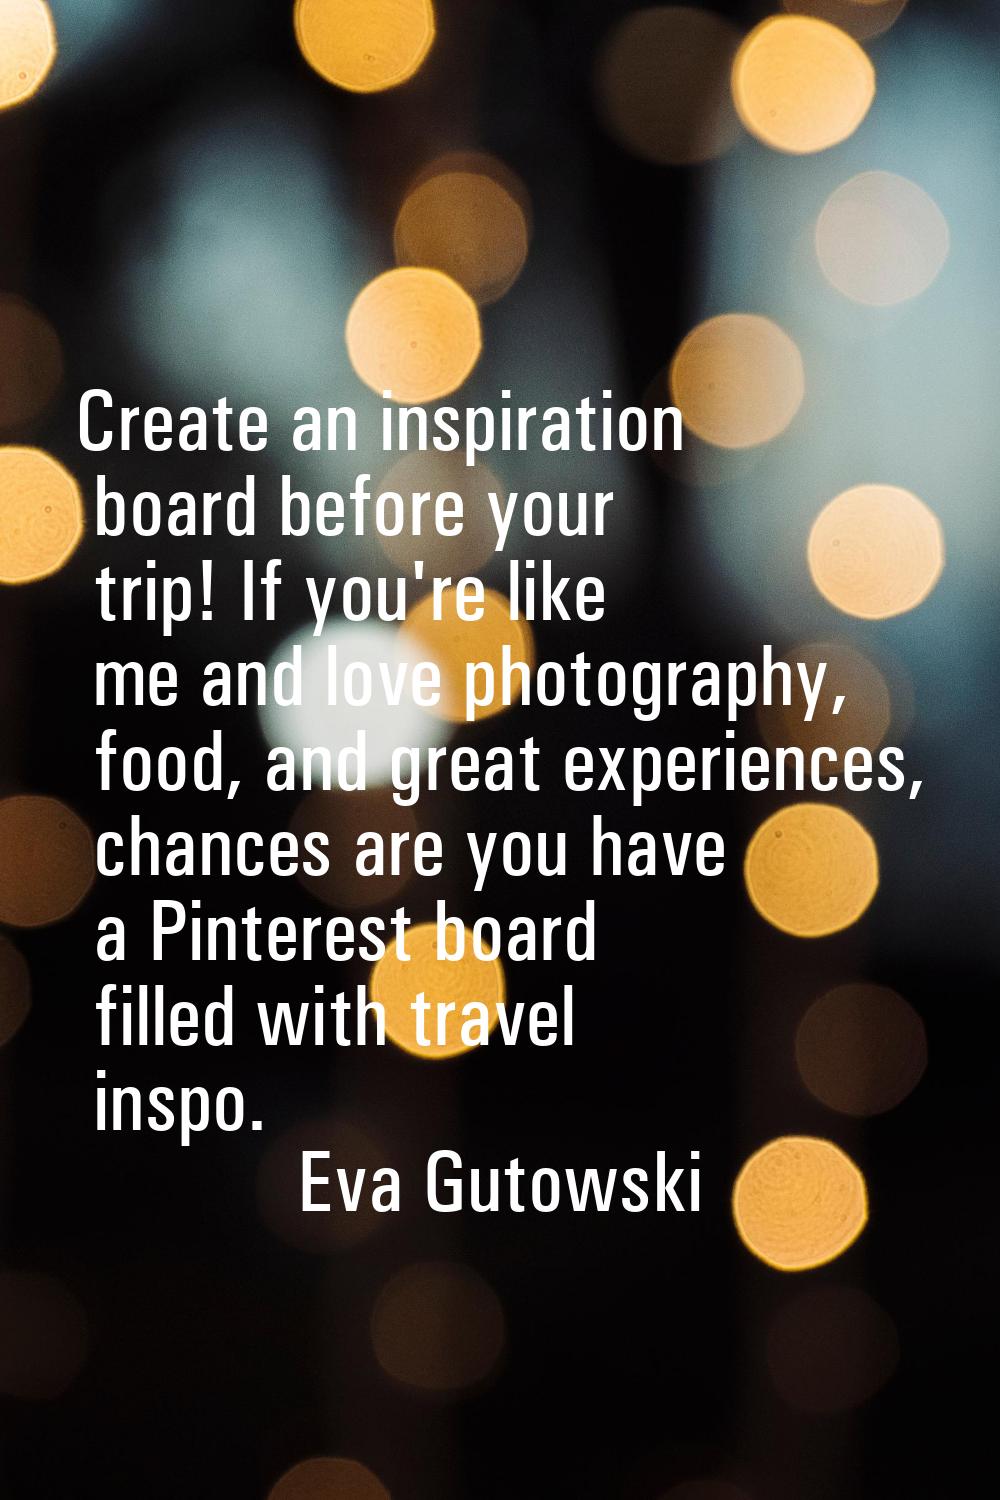 Create an inspiration board before your trip! If you're like me and love photography, food, and gre